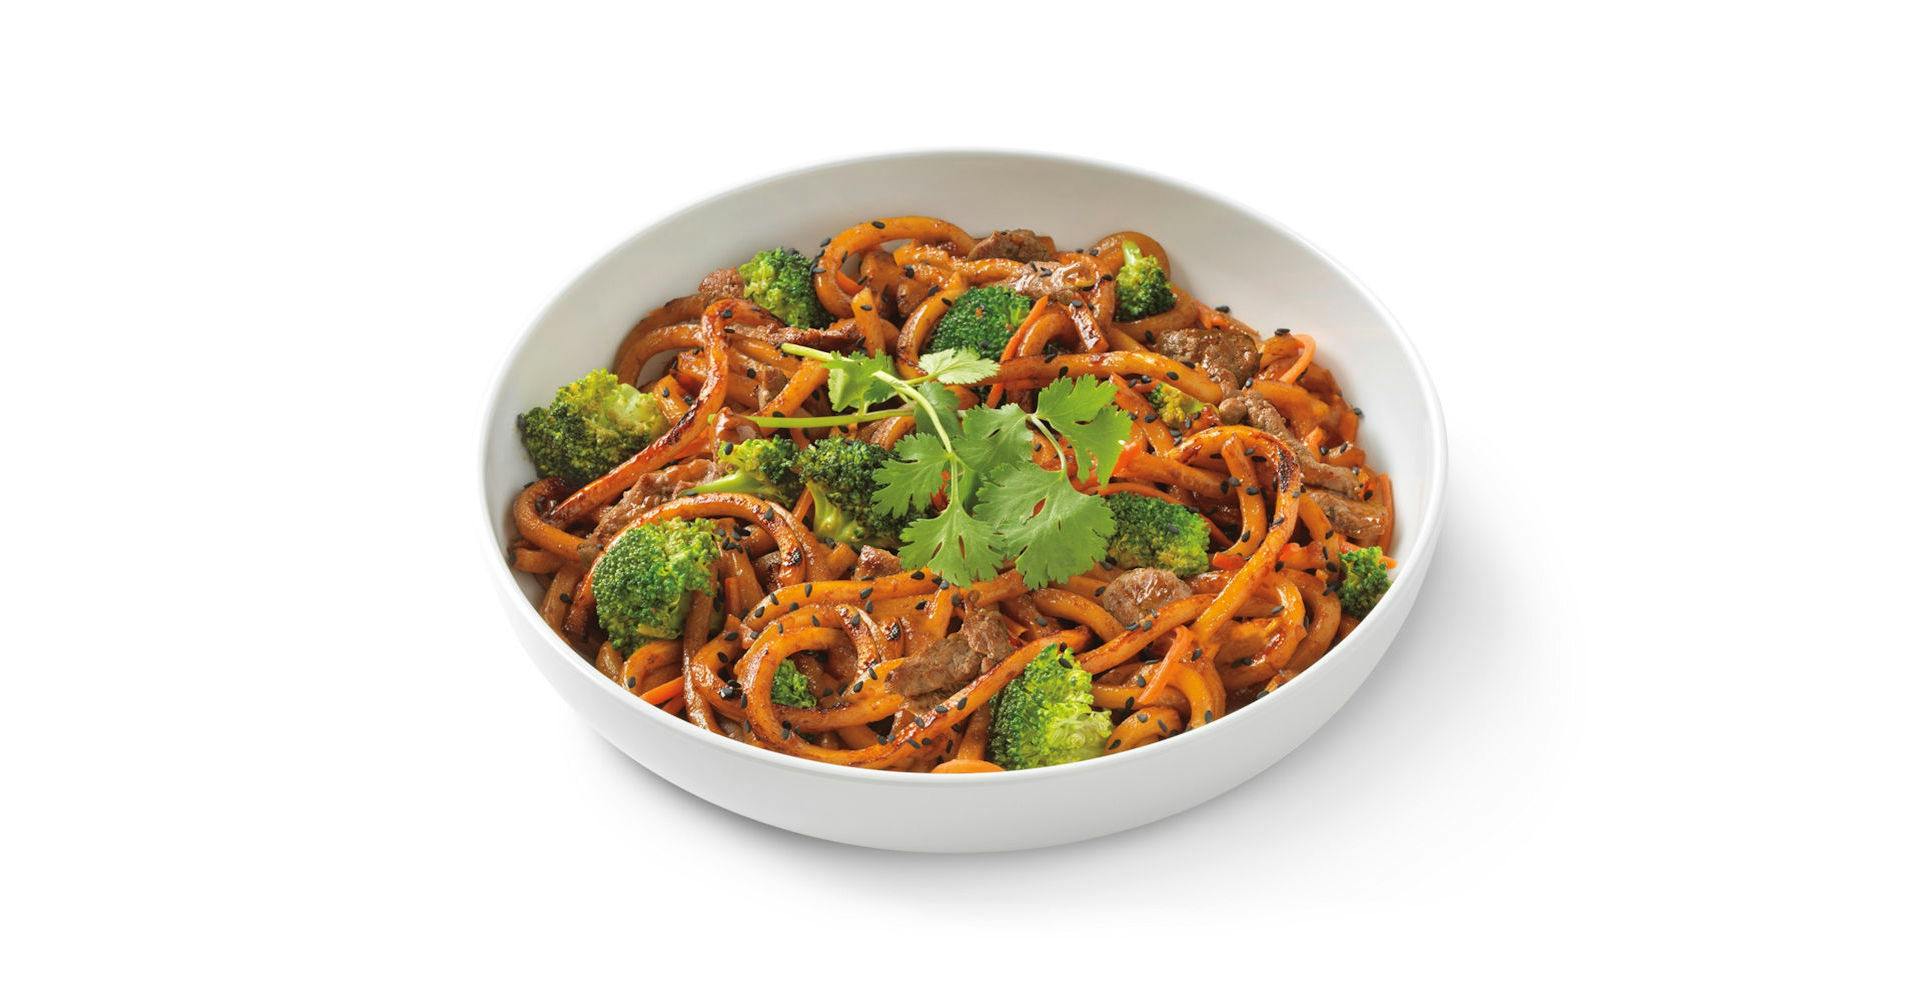 Japanese Pan Noodles with Marinated Steak from Noodles & Company - Fox River Mall in Appleton, WI